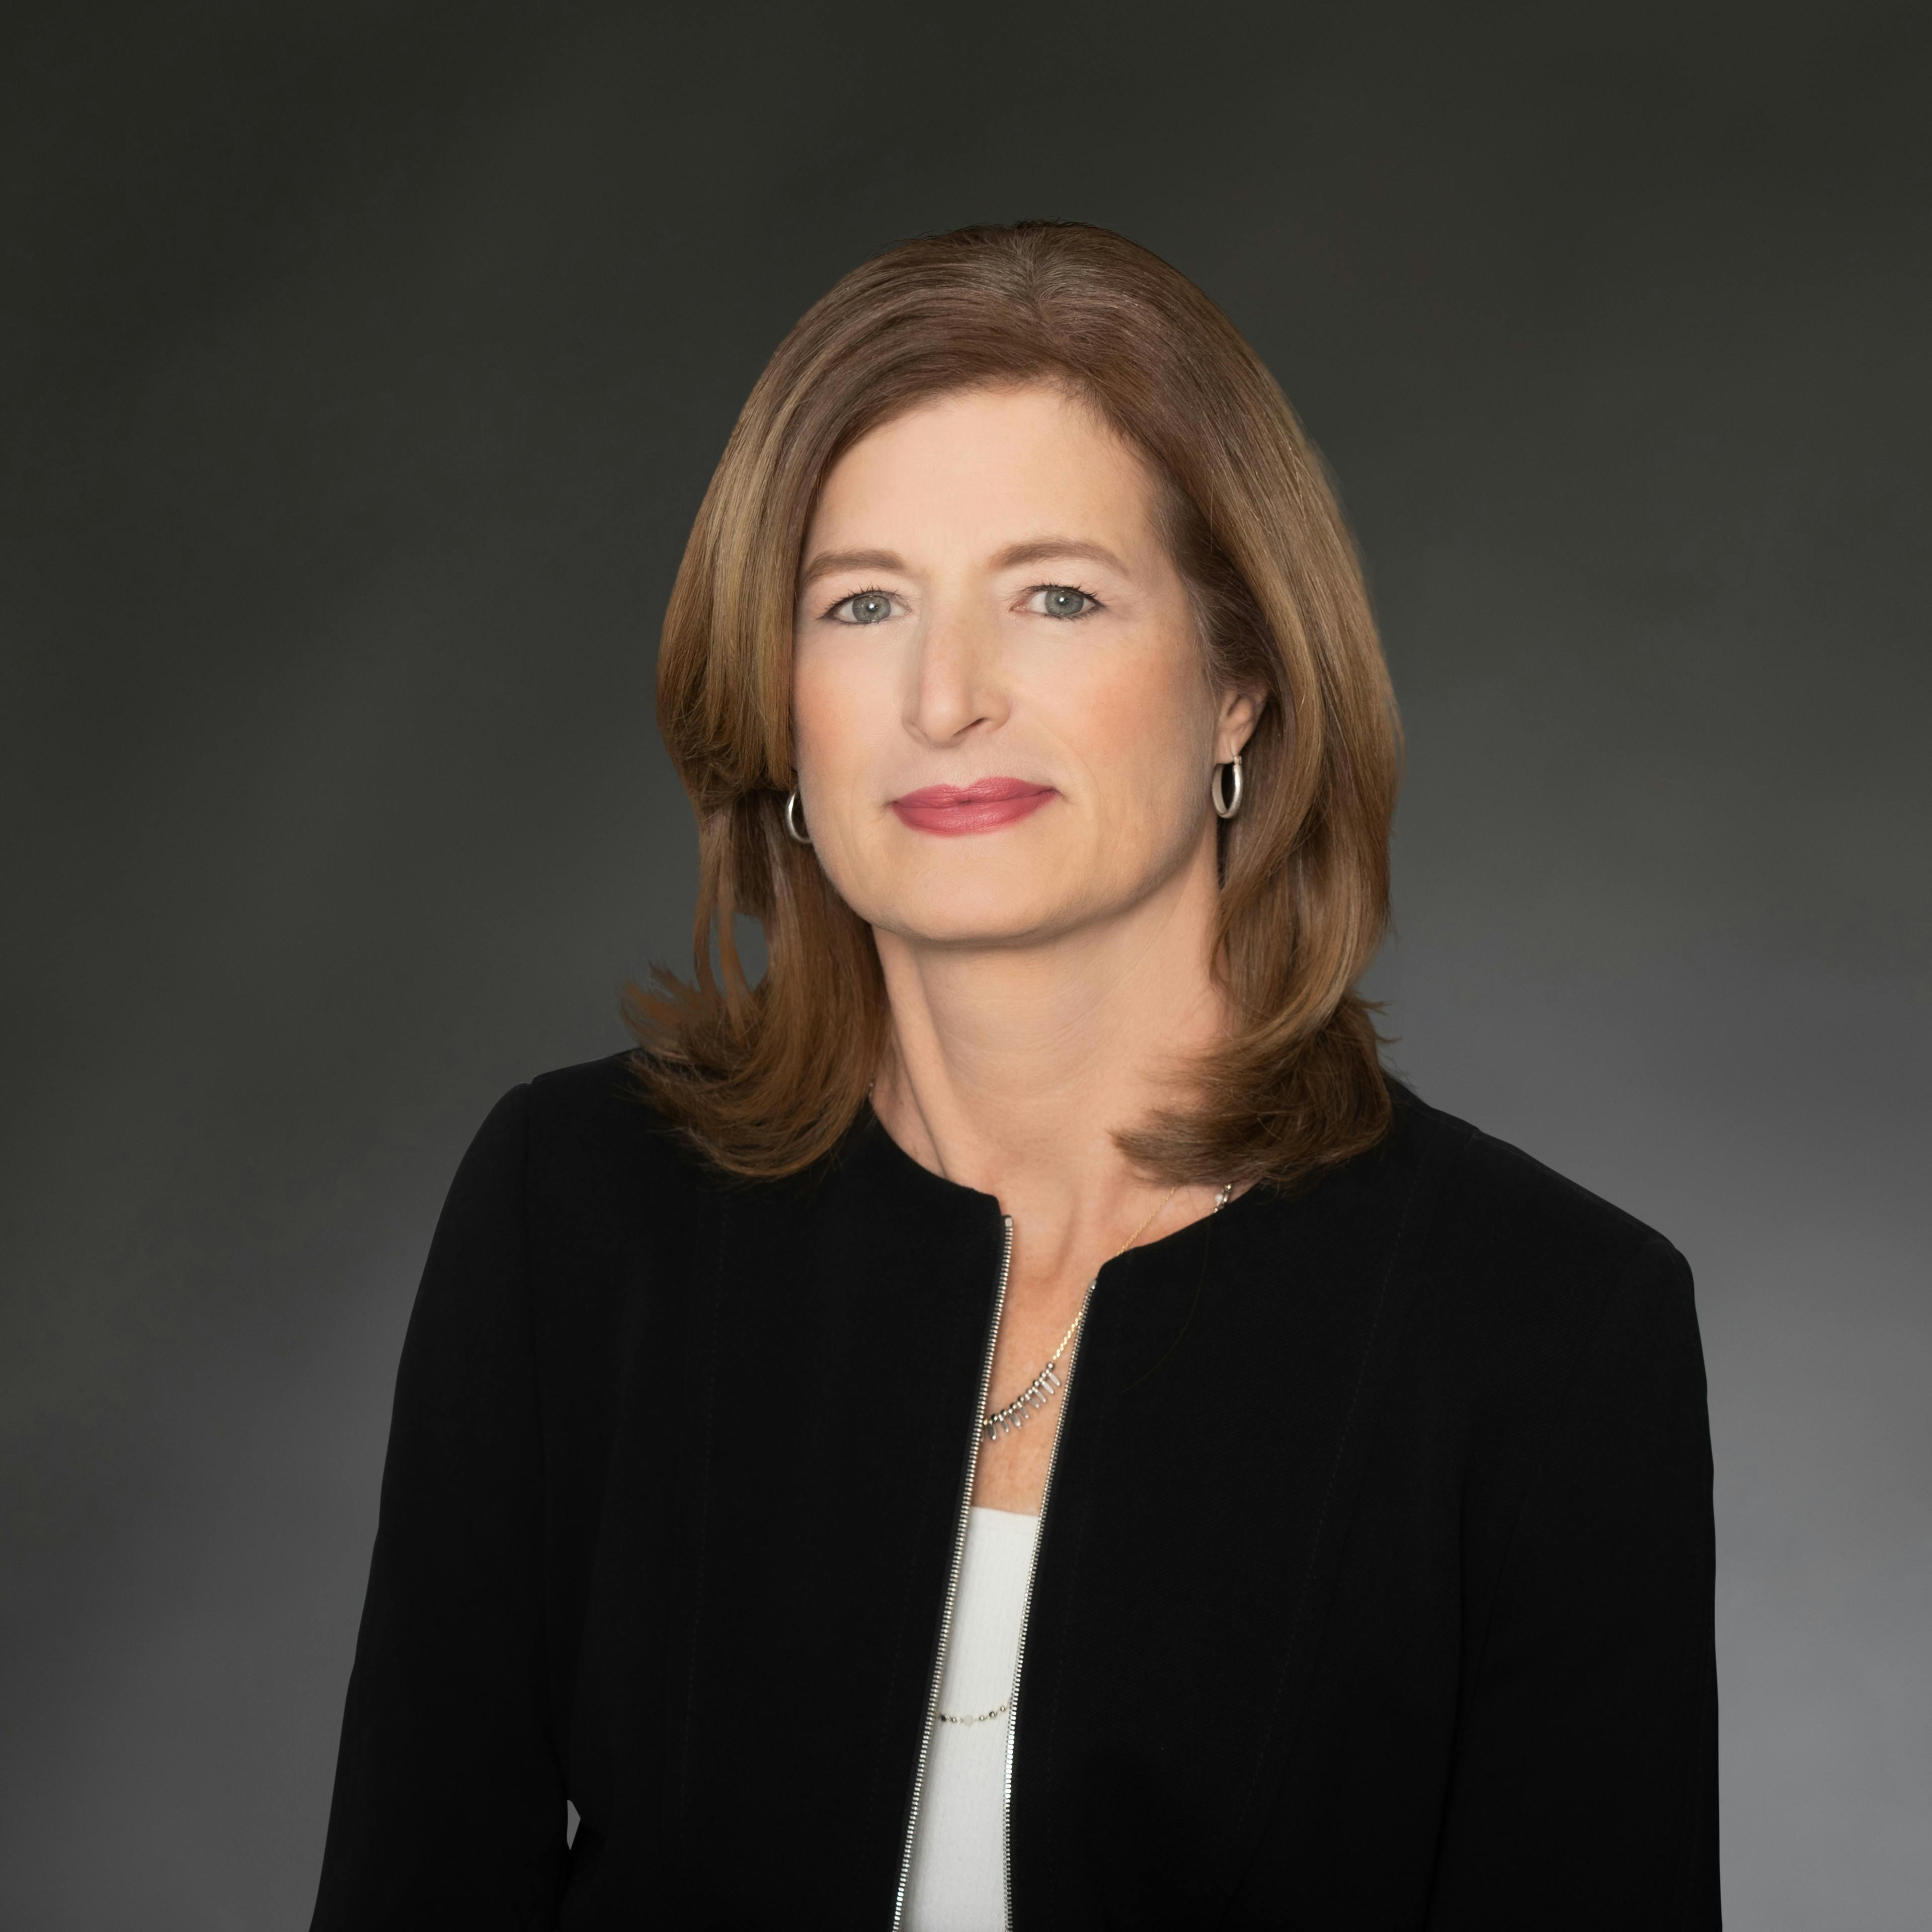 Ellen Stang, founder and CEO of ProgenyHealth